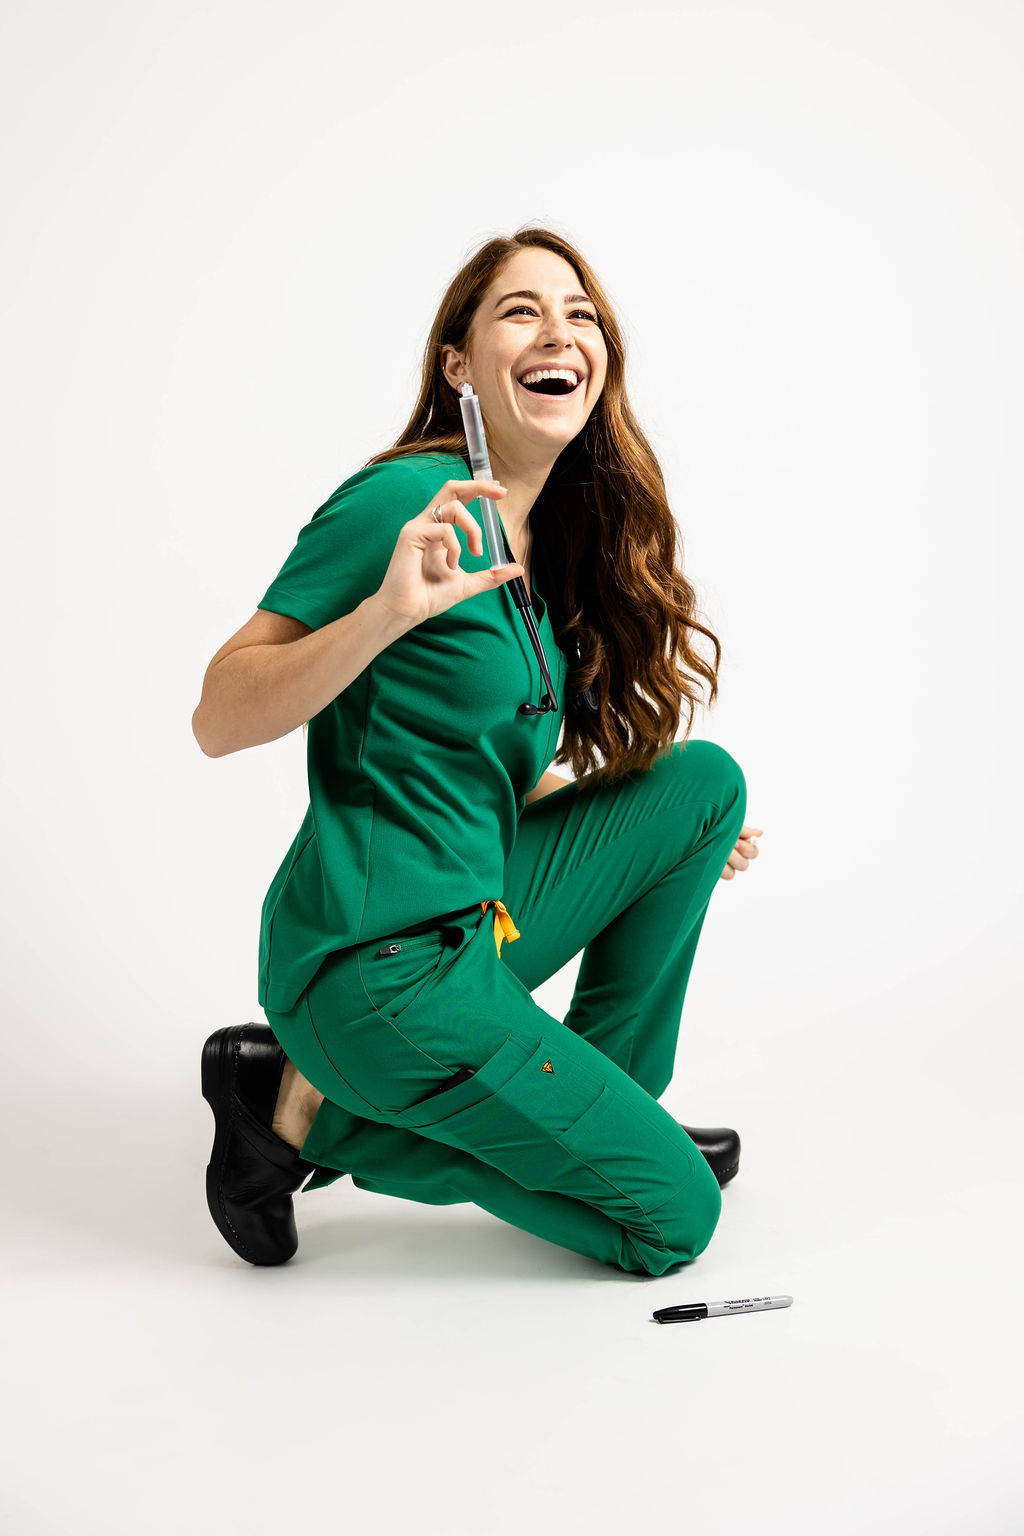 Bodie - relaxed fit medical scrub pants for nurses in hunter green.